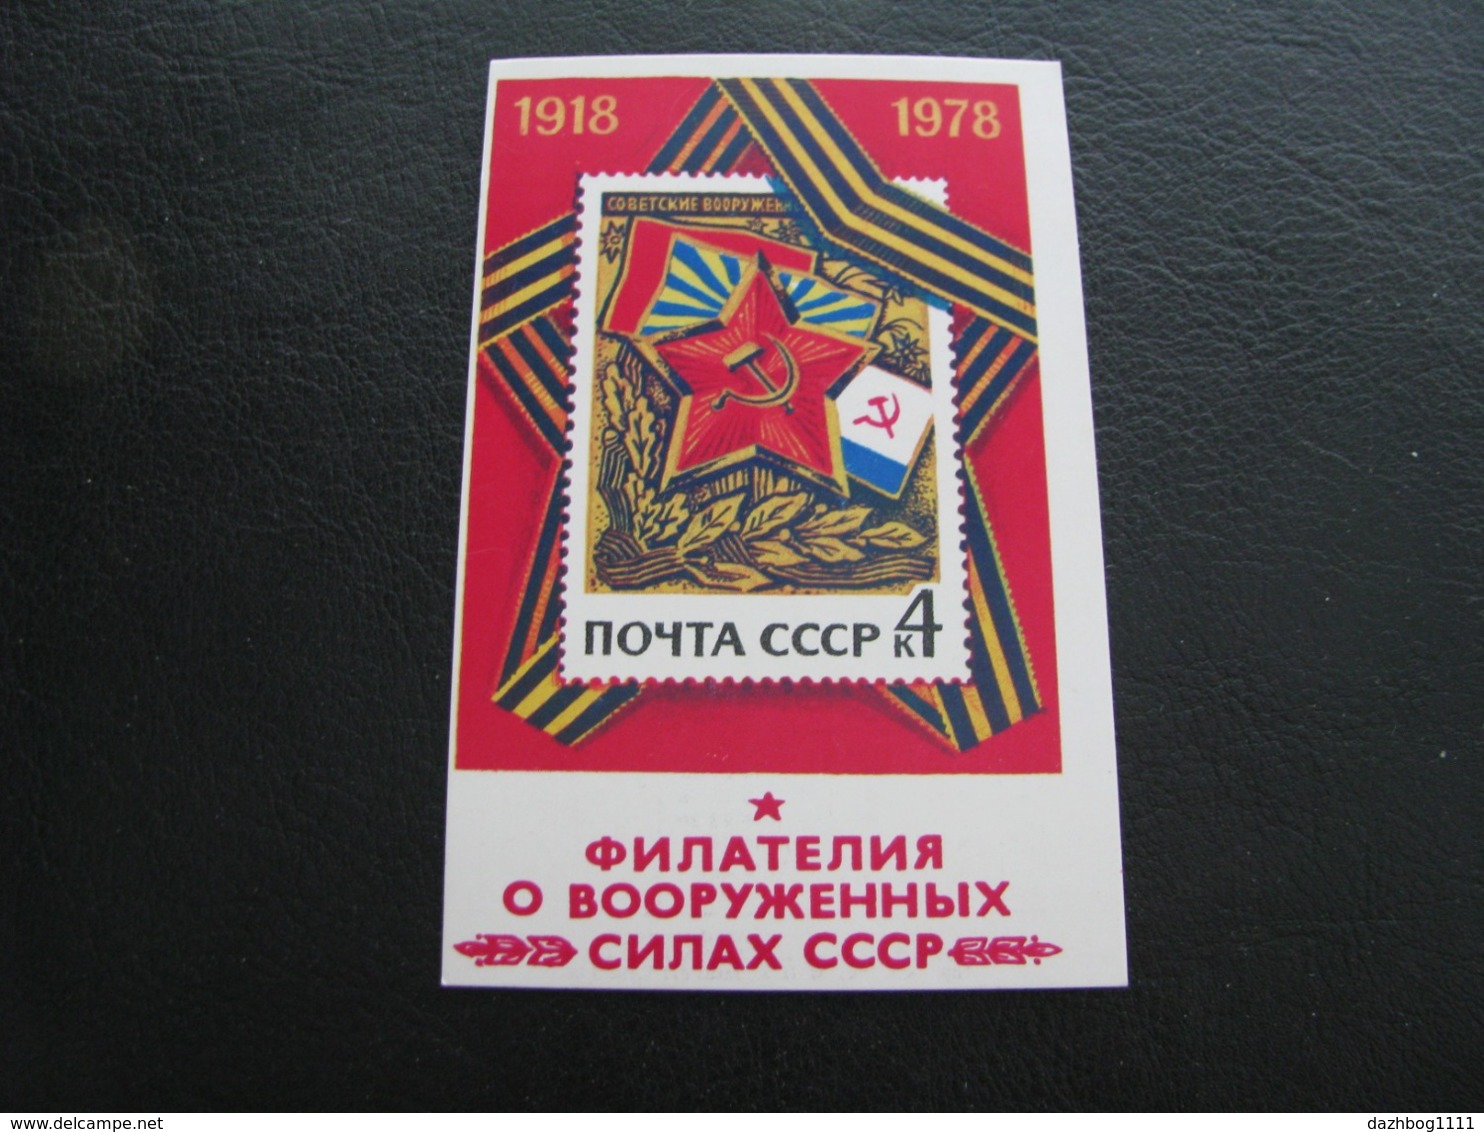 USSR Soviet Russia Pocket Calendar Postage Stamps Of The USSR Philately About The Armed Forces Of The USSR 1978 - Small : 1971-80